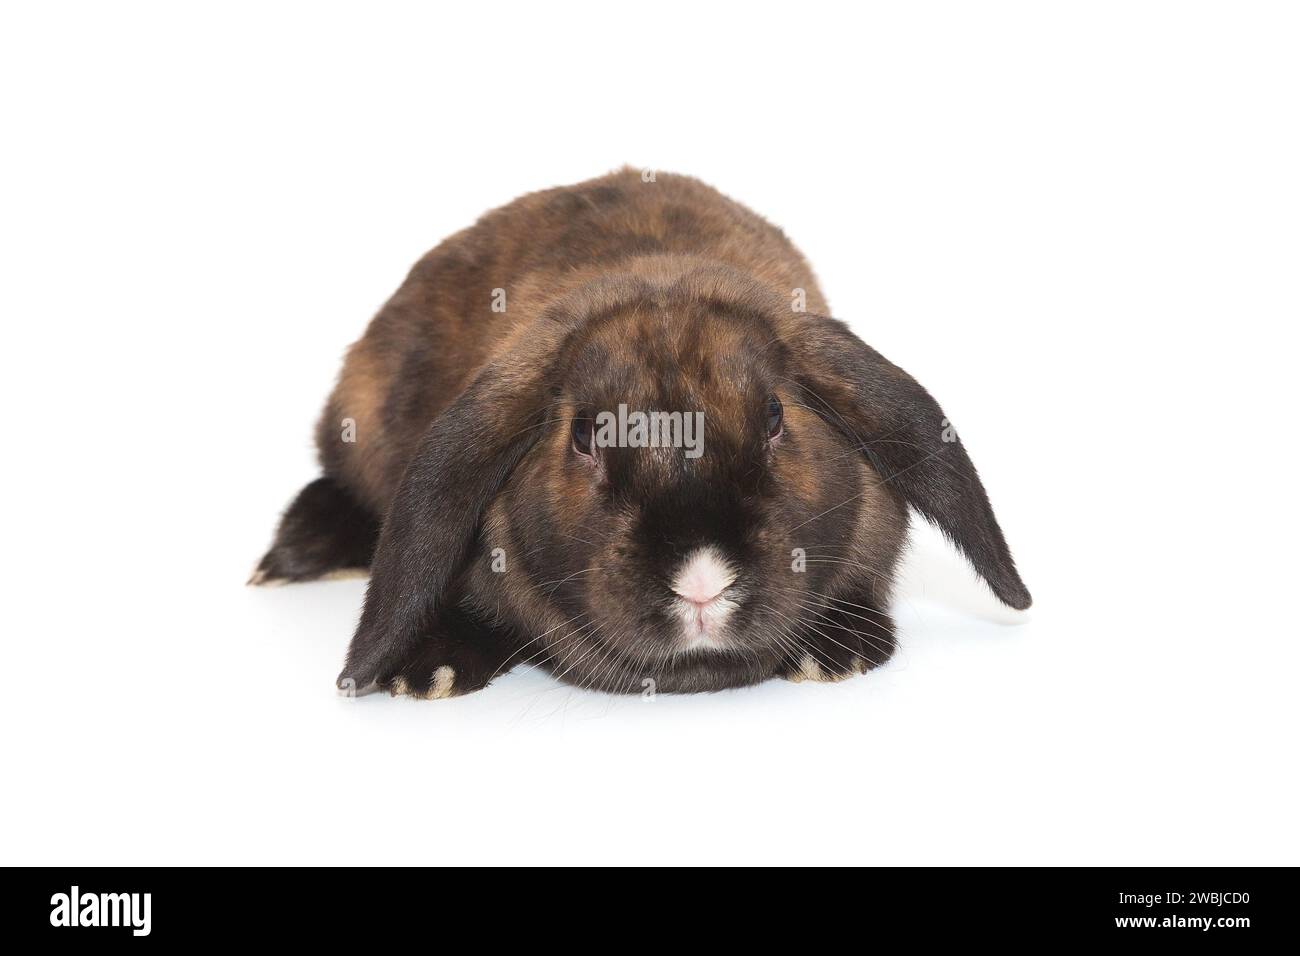 Decorative, small lop-eared rabbit with a white nose, ram  breed, highlighted on a white background. Stock Photo